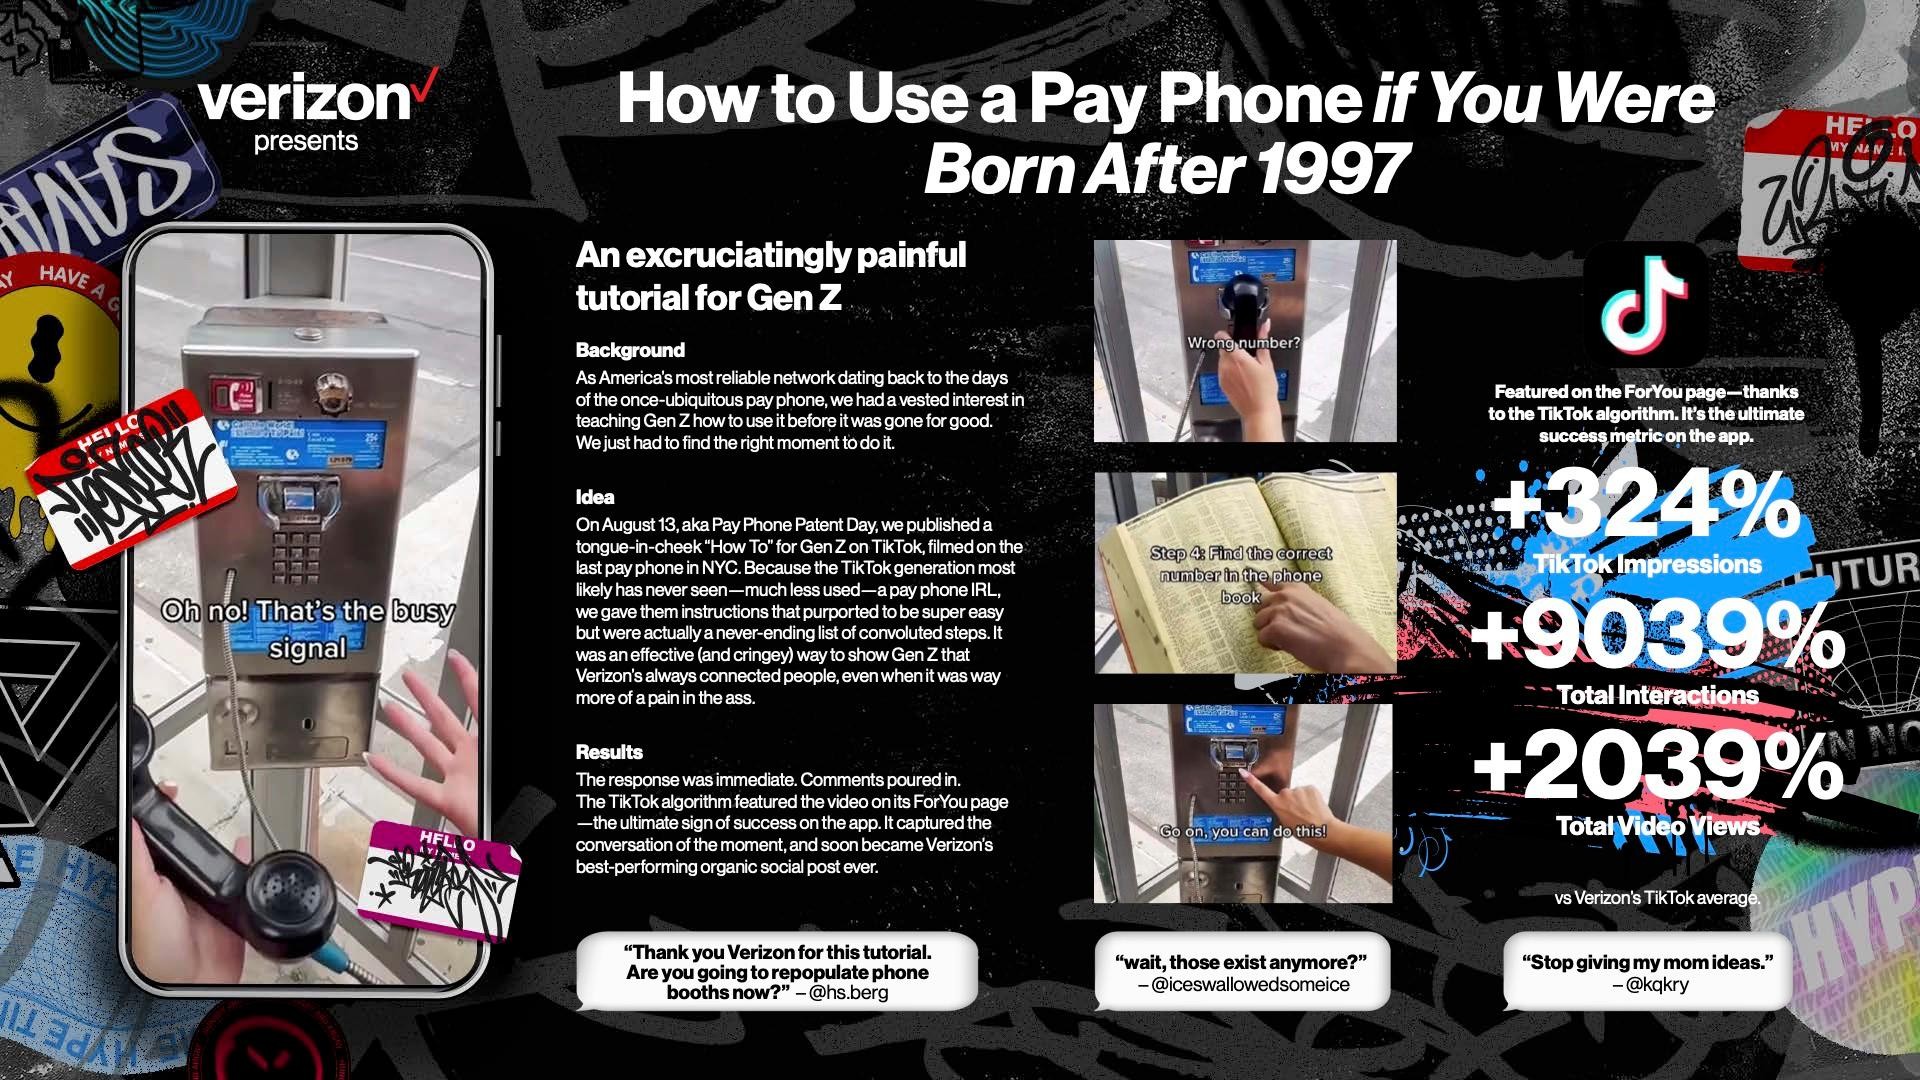 How to Use a Pay Phone if You Were Born After 1997: An excruciatingly painful tutorial for Gen Z.